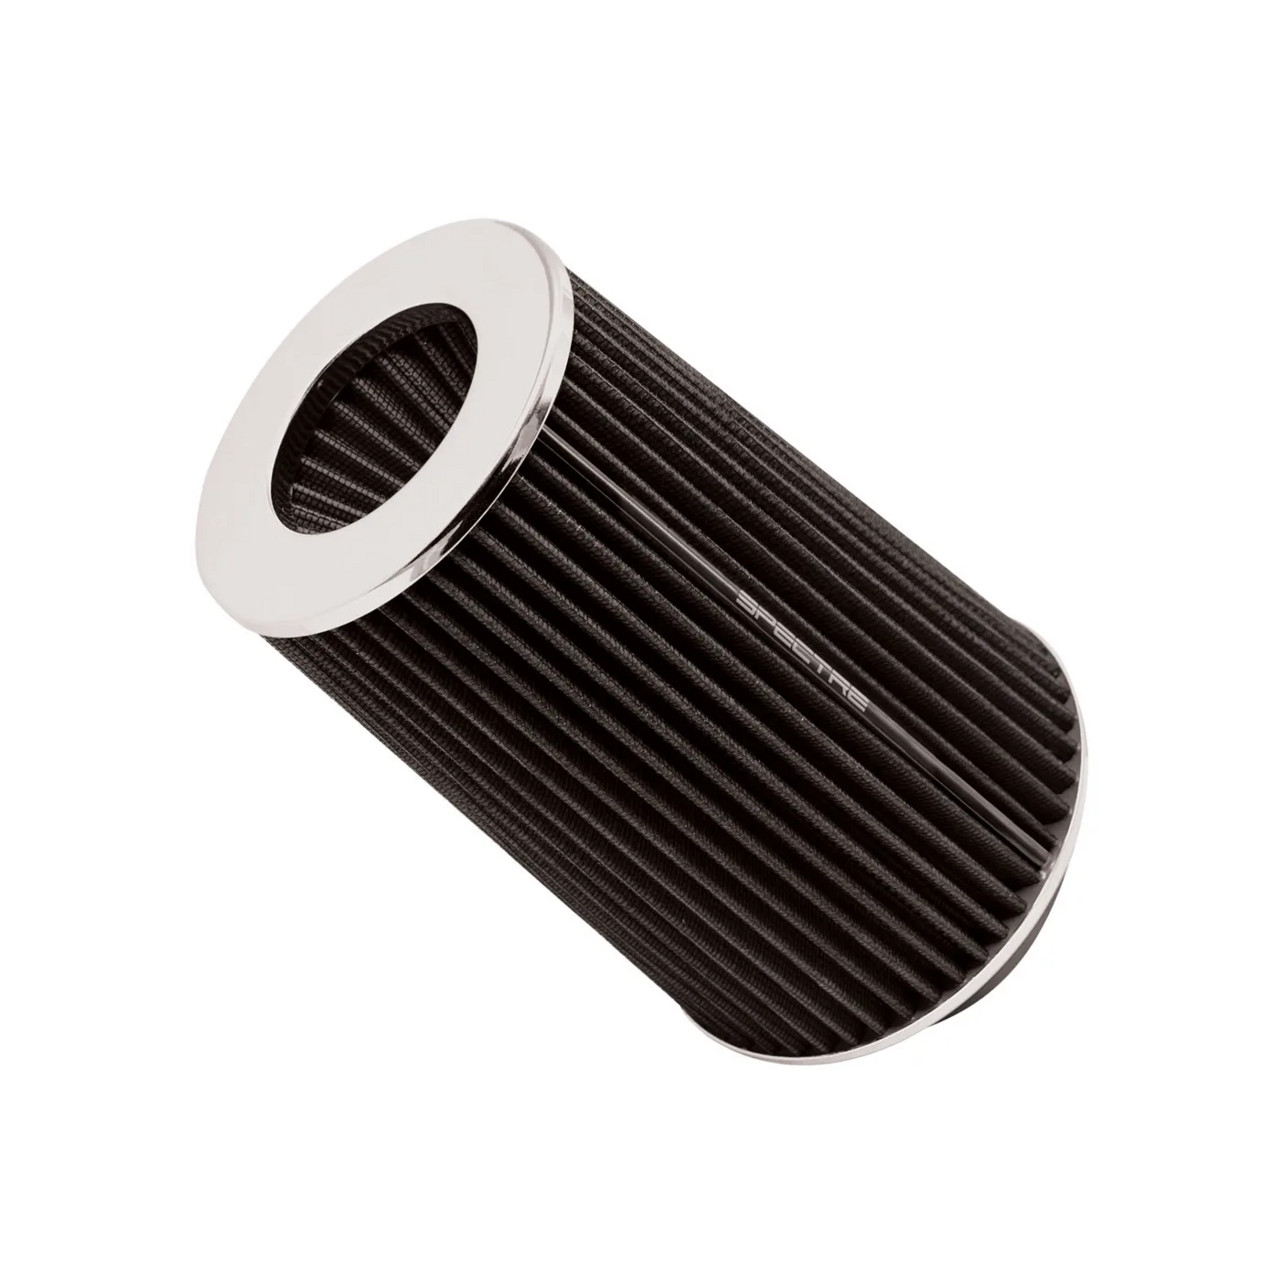 SPECTRE CONICAL AIR FILTER Black